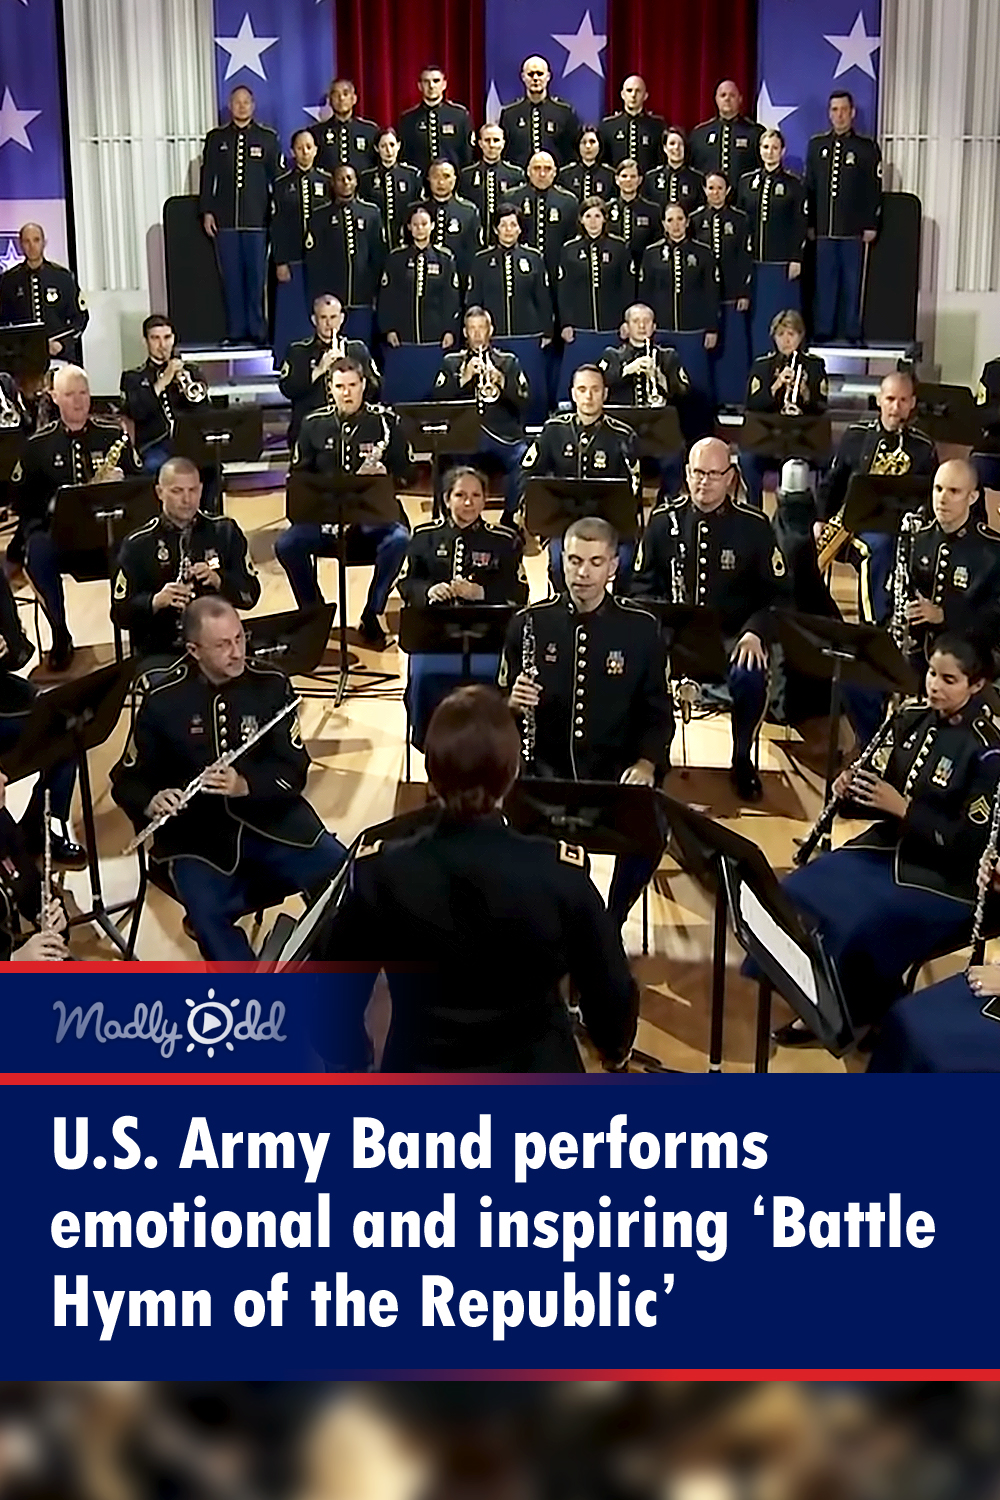 U.S. Army Band performs inspiring ‘Battle Hymn of the Republic’